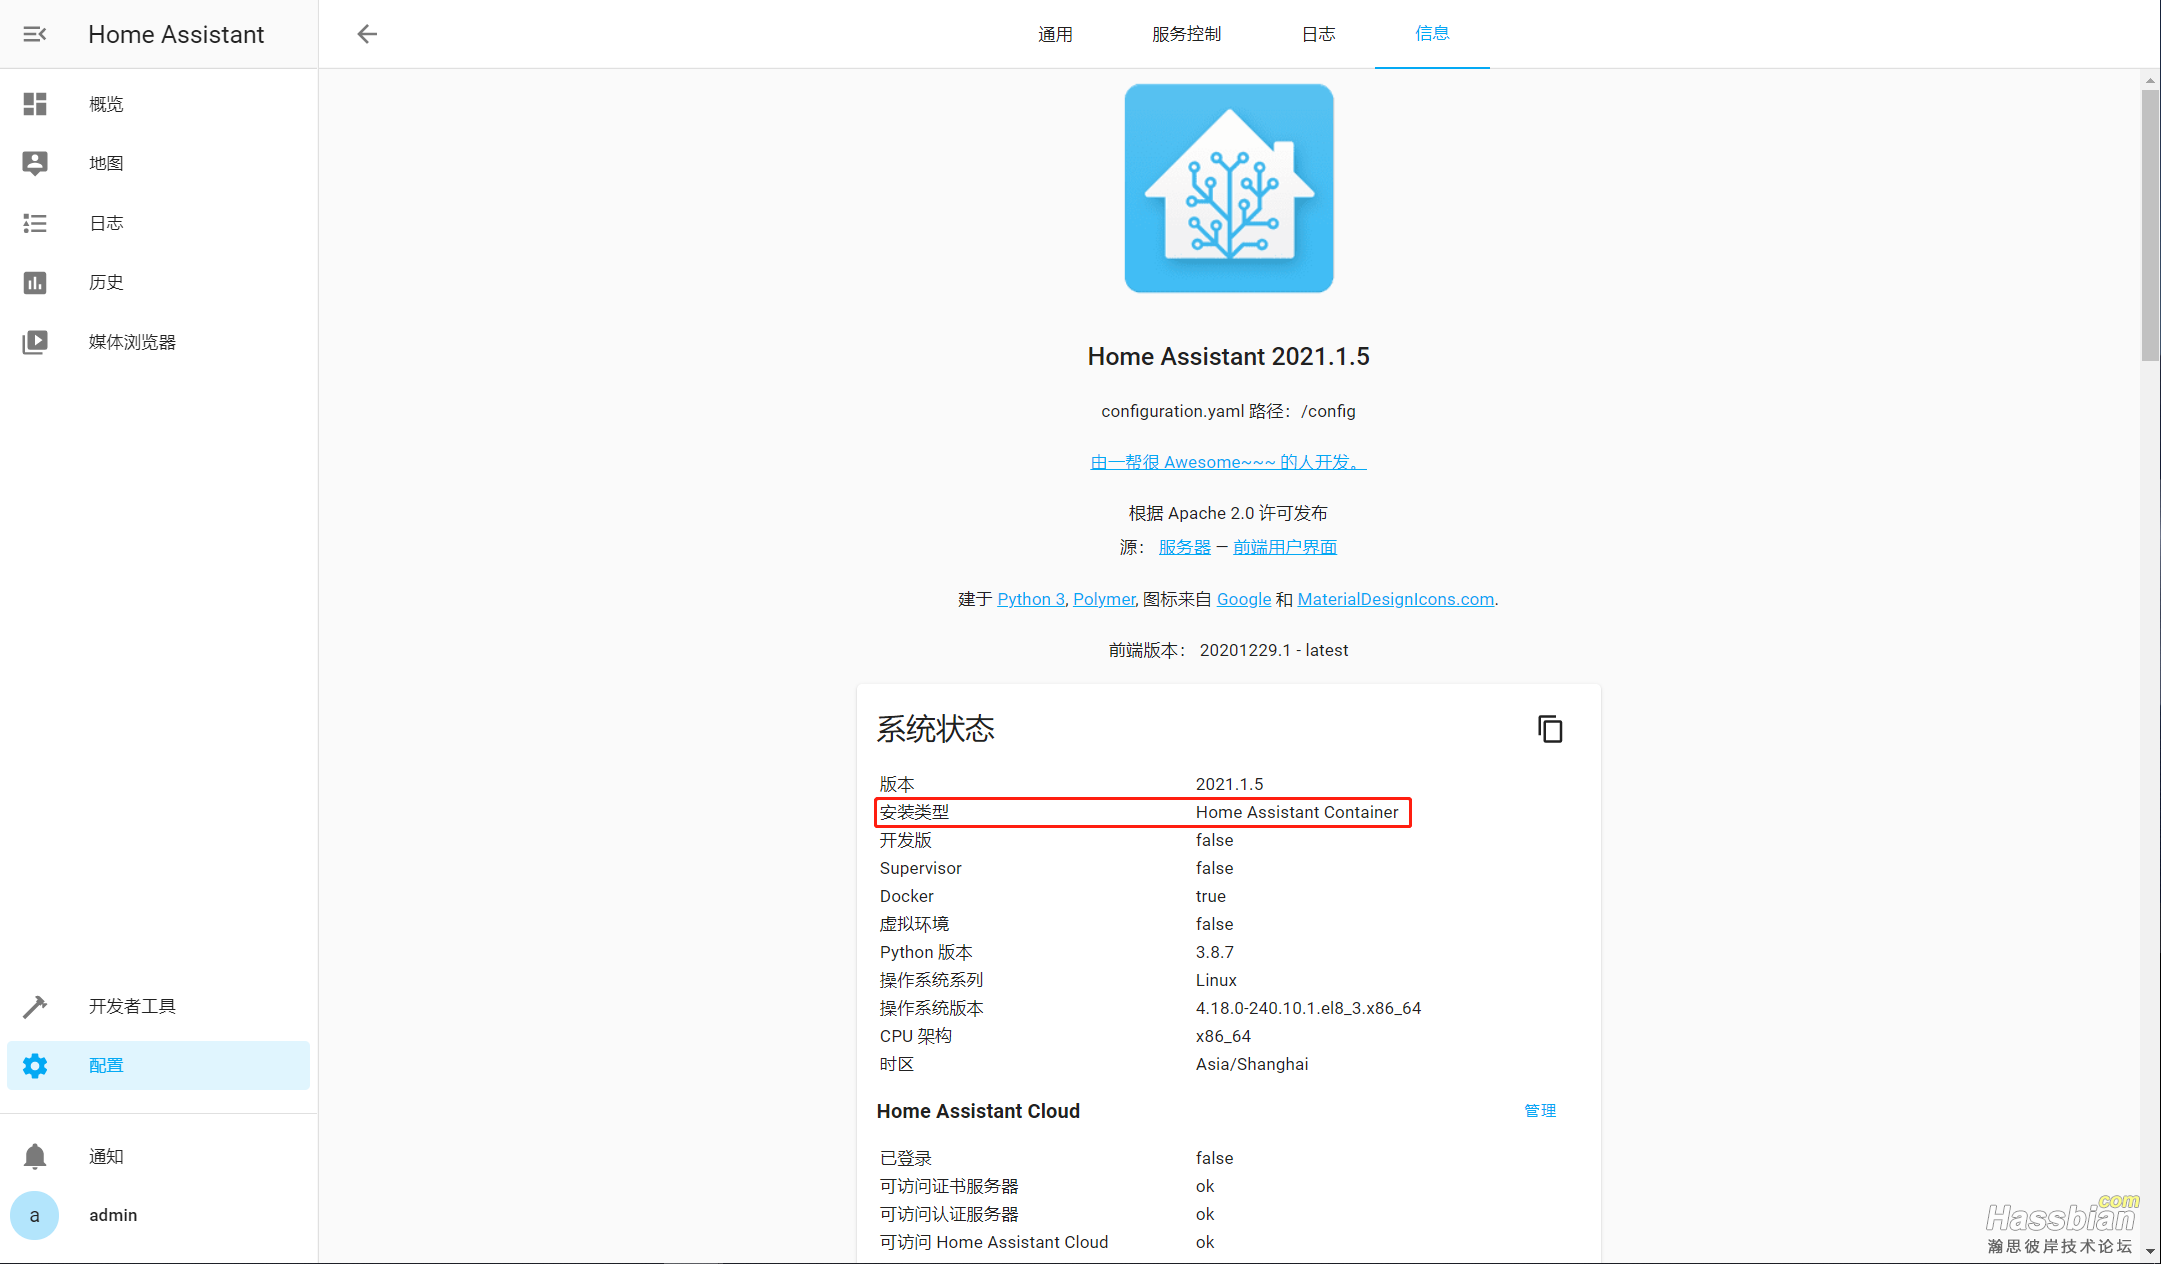 docker环境(Home Assistant Container)